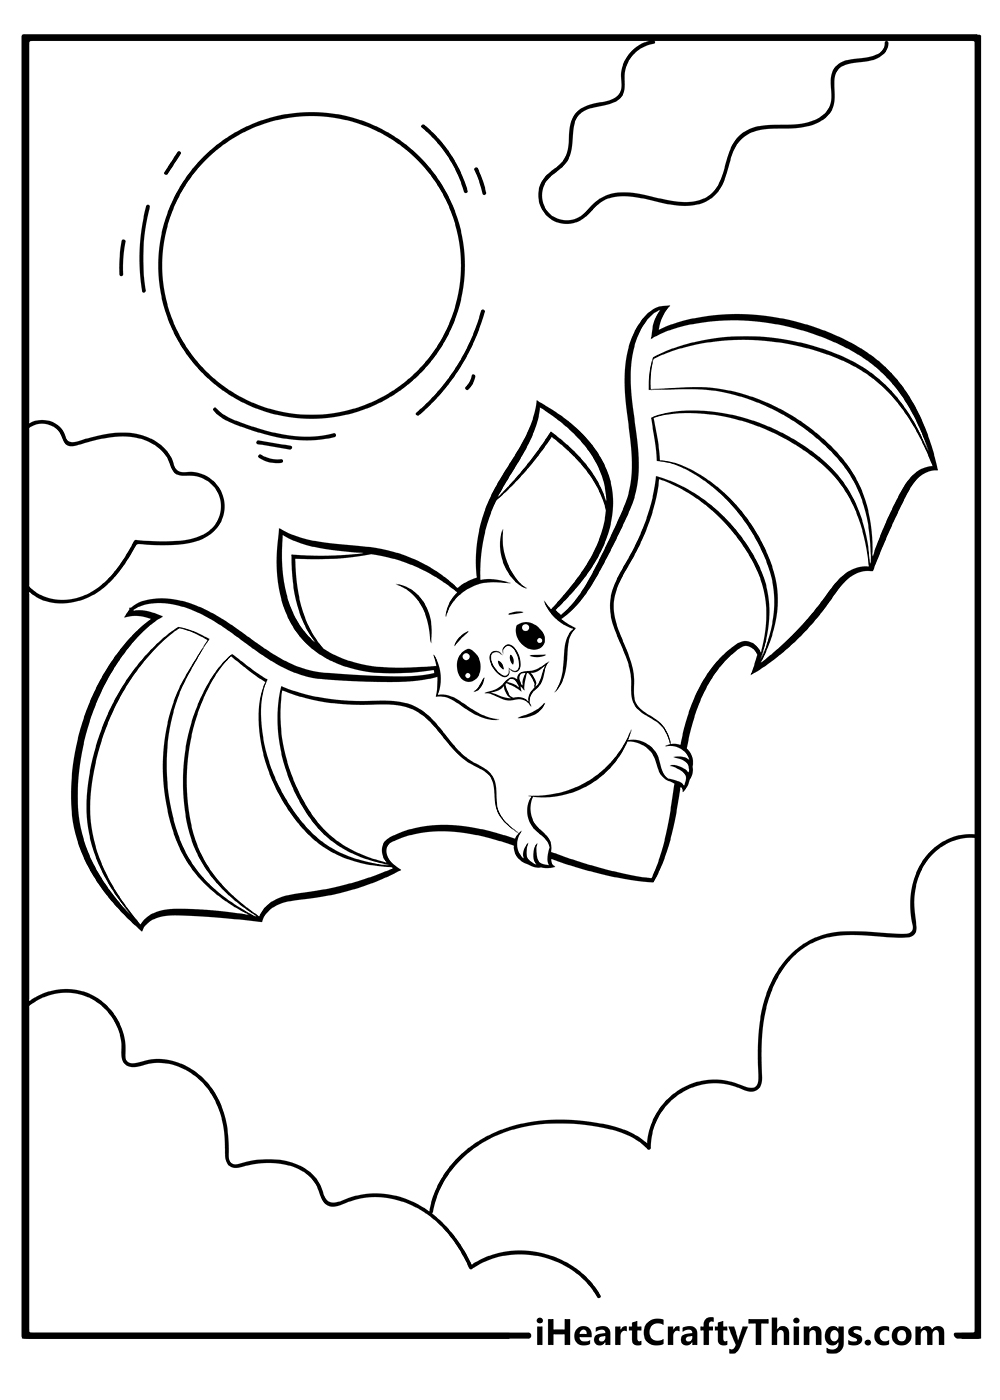 Printable Bat Coloring Pages Updated 20